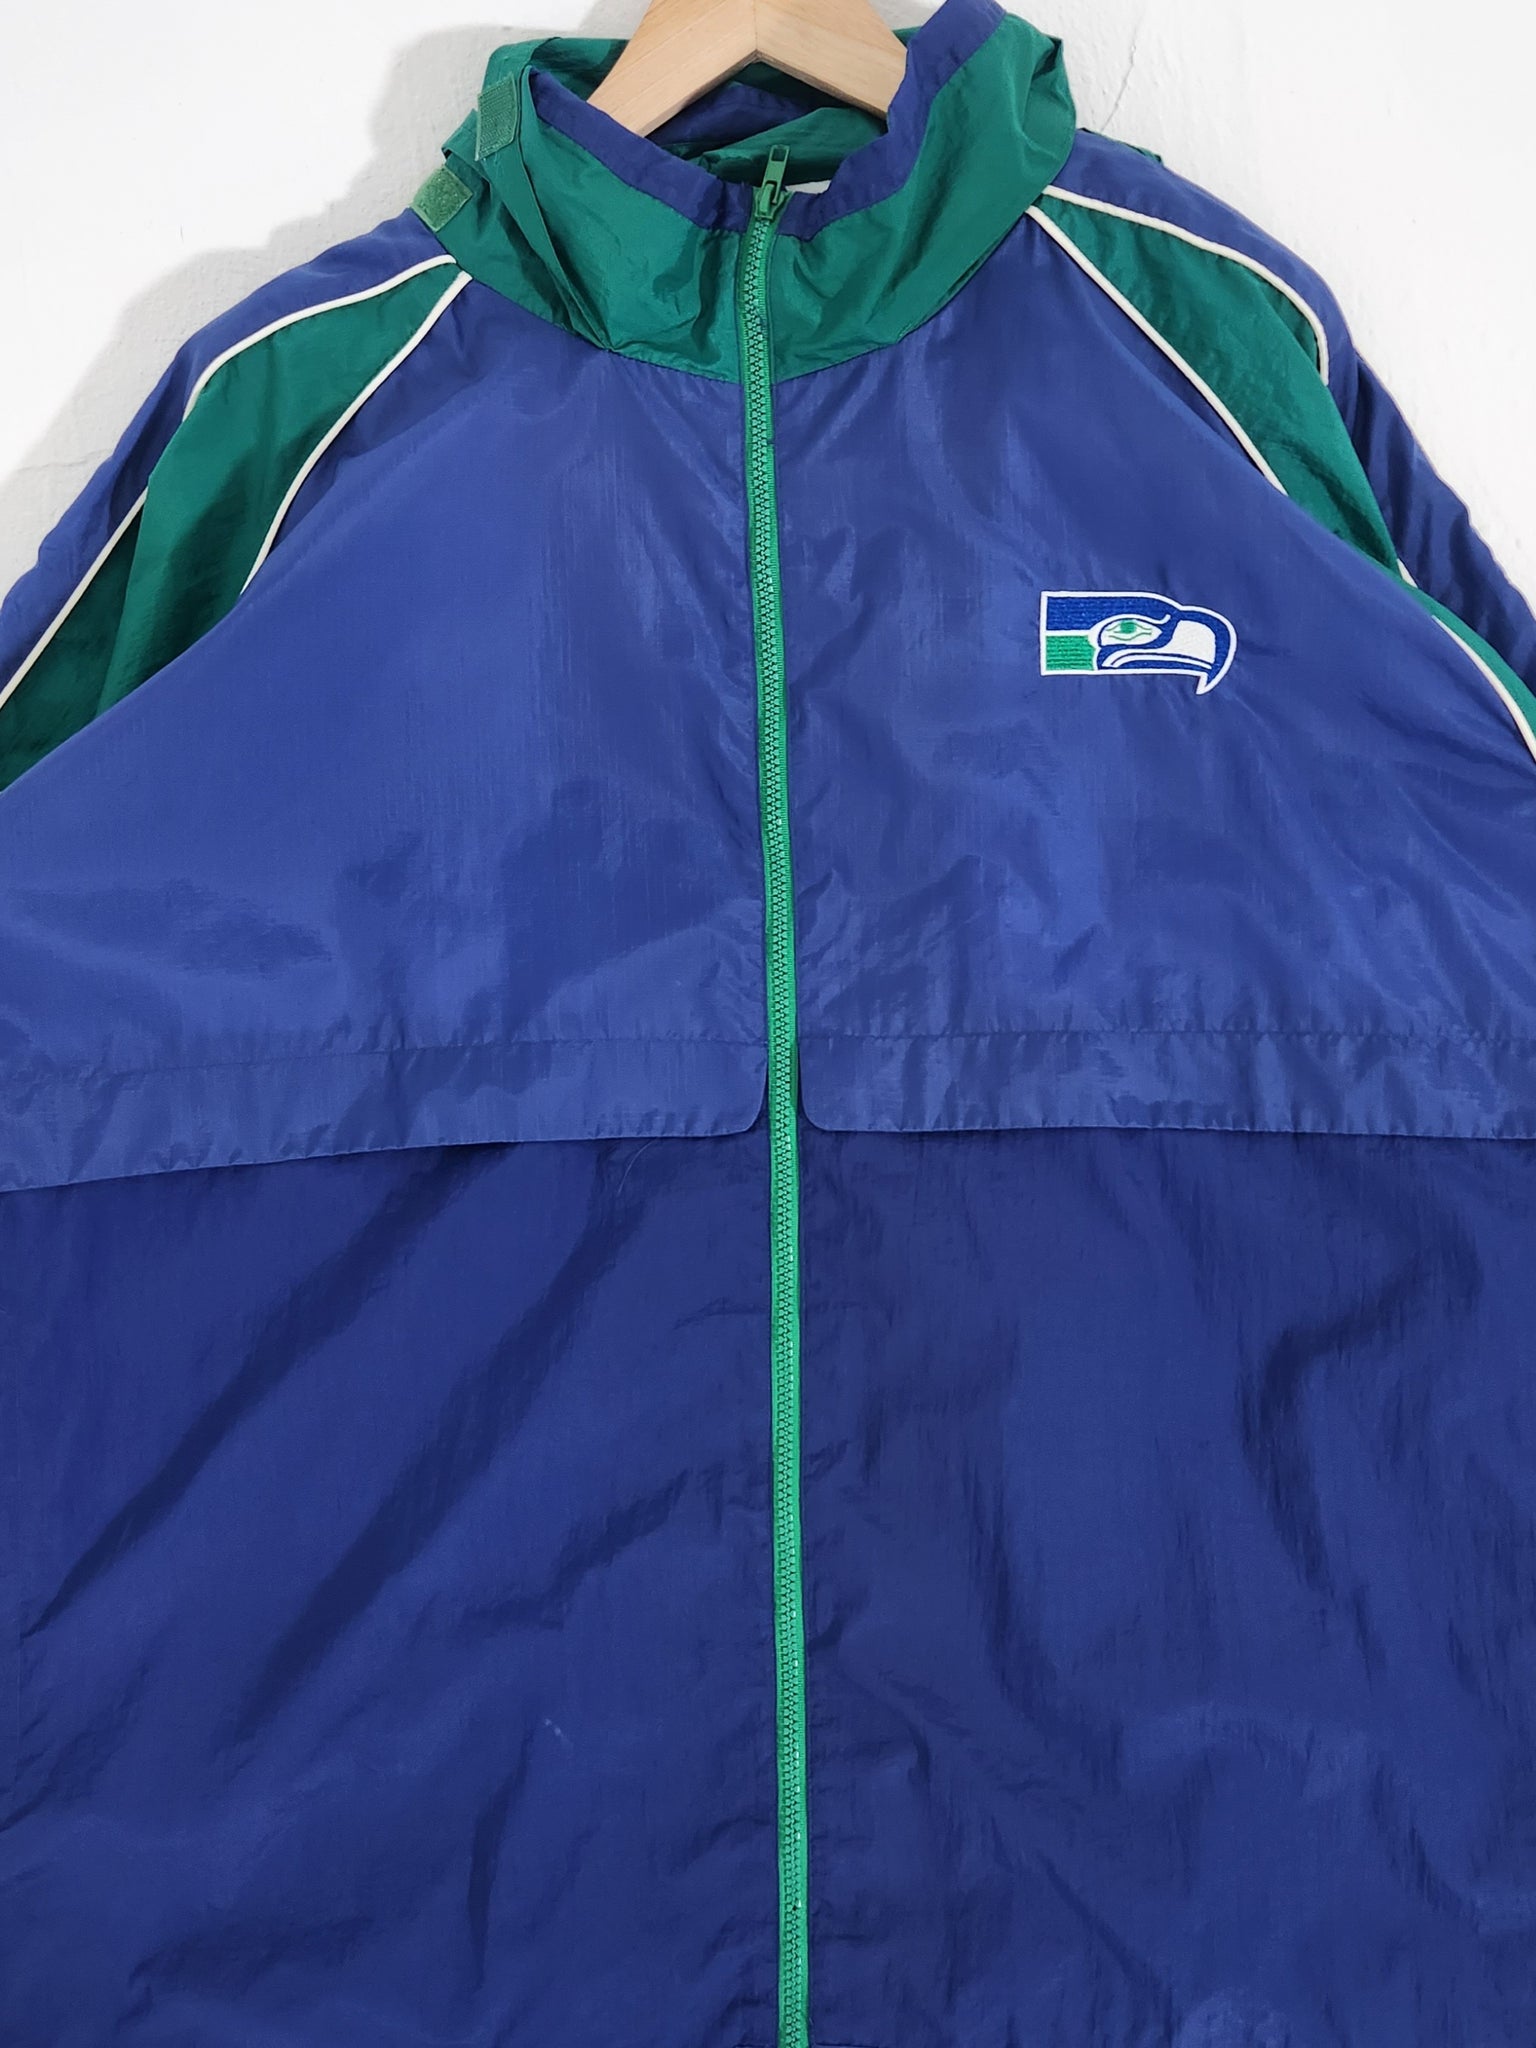 Seattle Seahawks THE GREAT PNW Camo Level Half-Zip Pullover Jacket